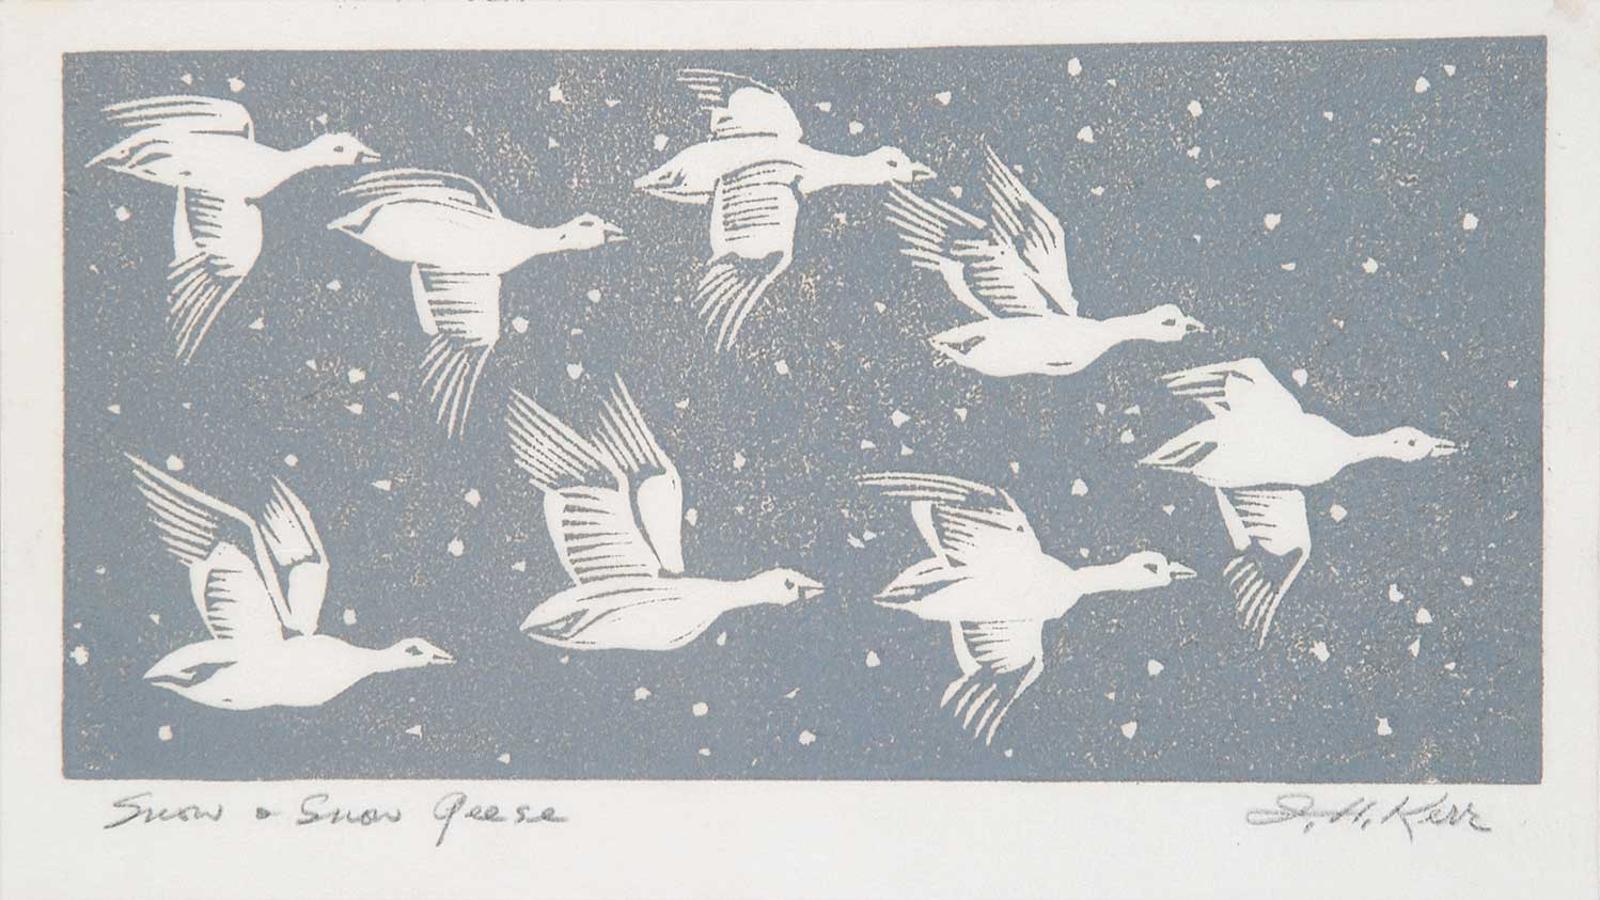 Illingworth Holey (Buck) Kerr (1905-1989) - Snow and Snow Geese